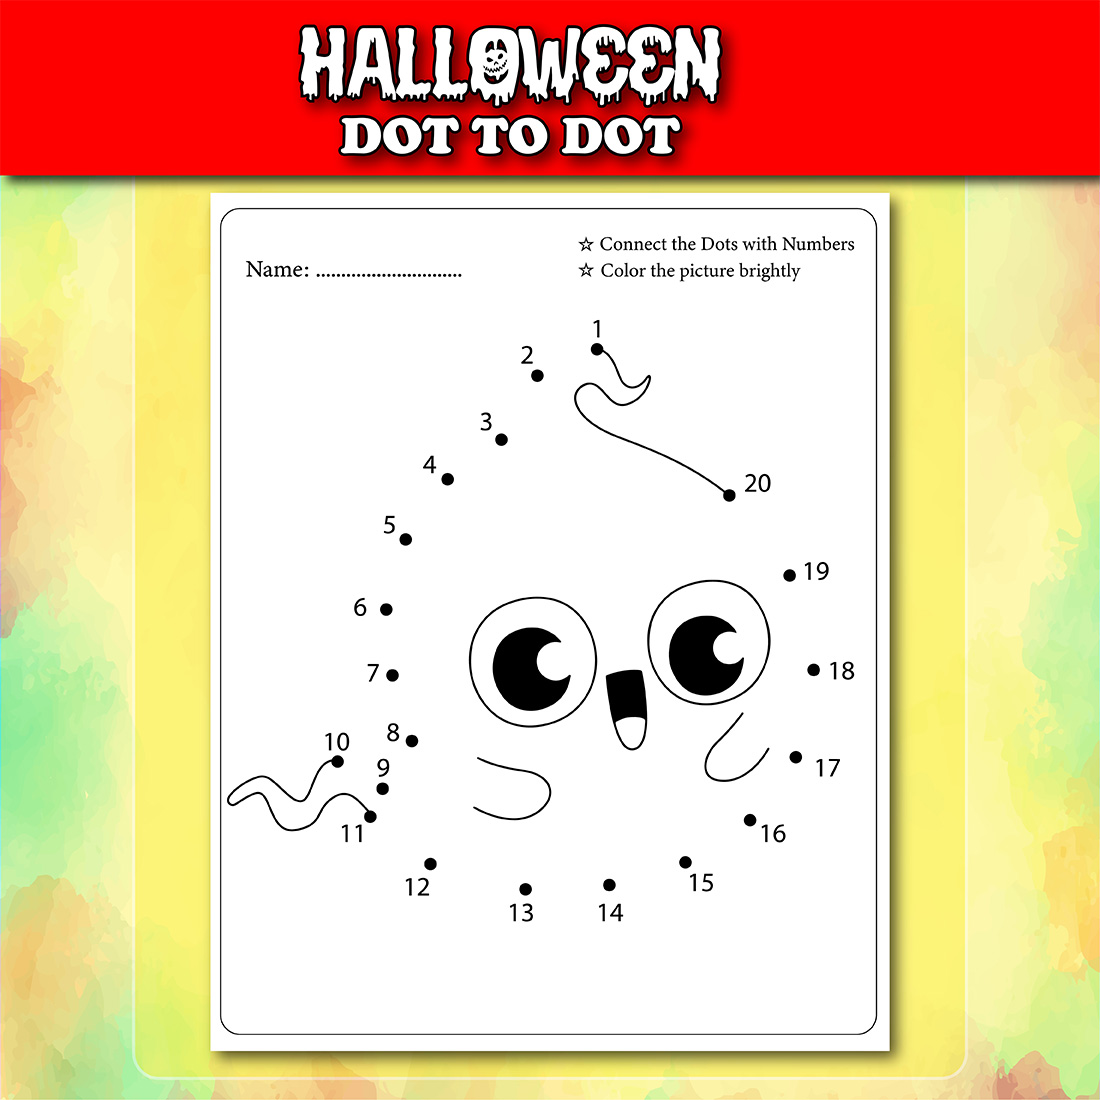 Halloween Dot To Dot For Kids Vol - 4, ghost page.